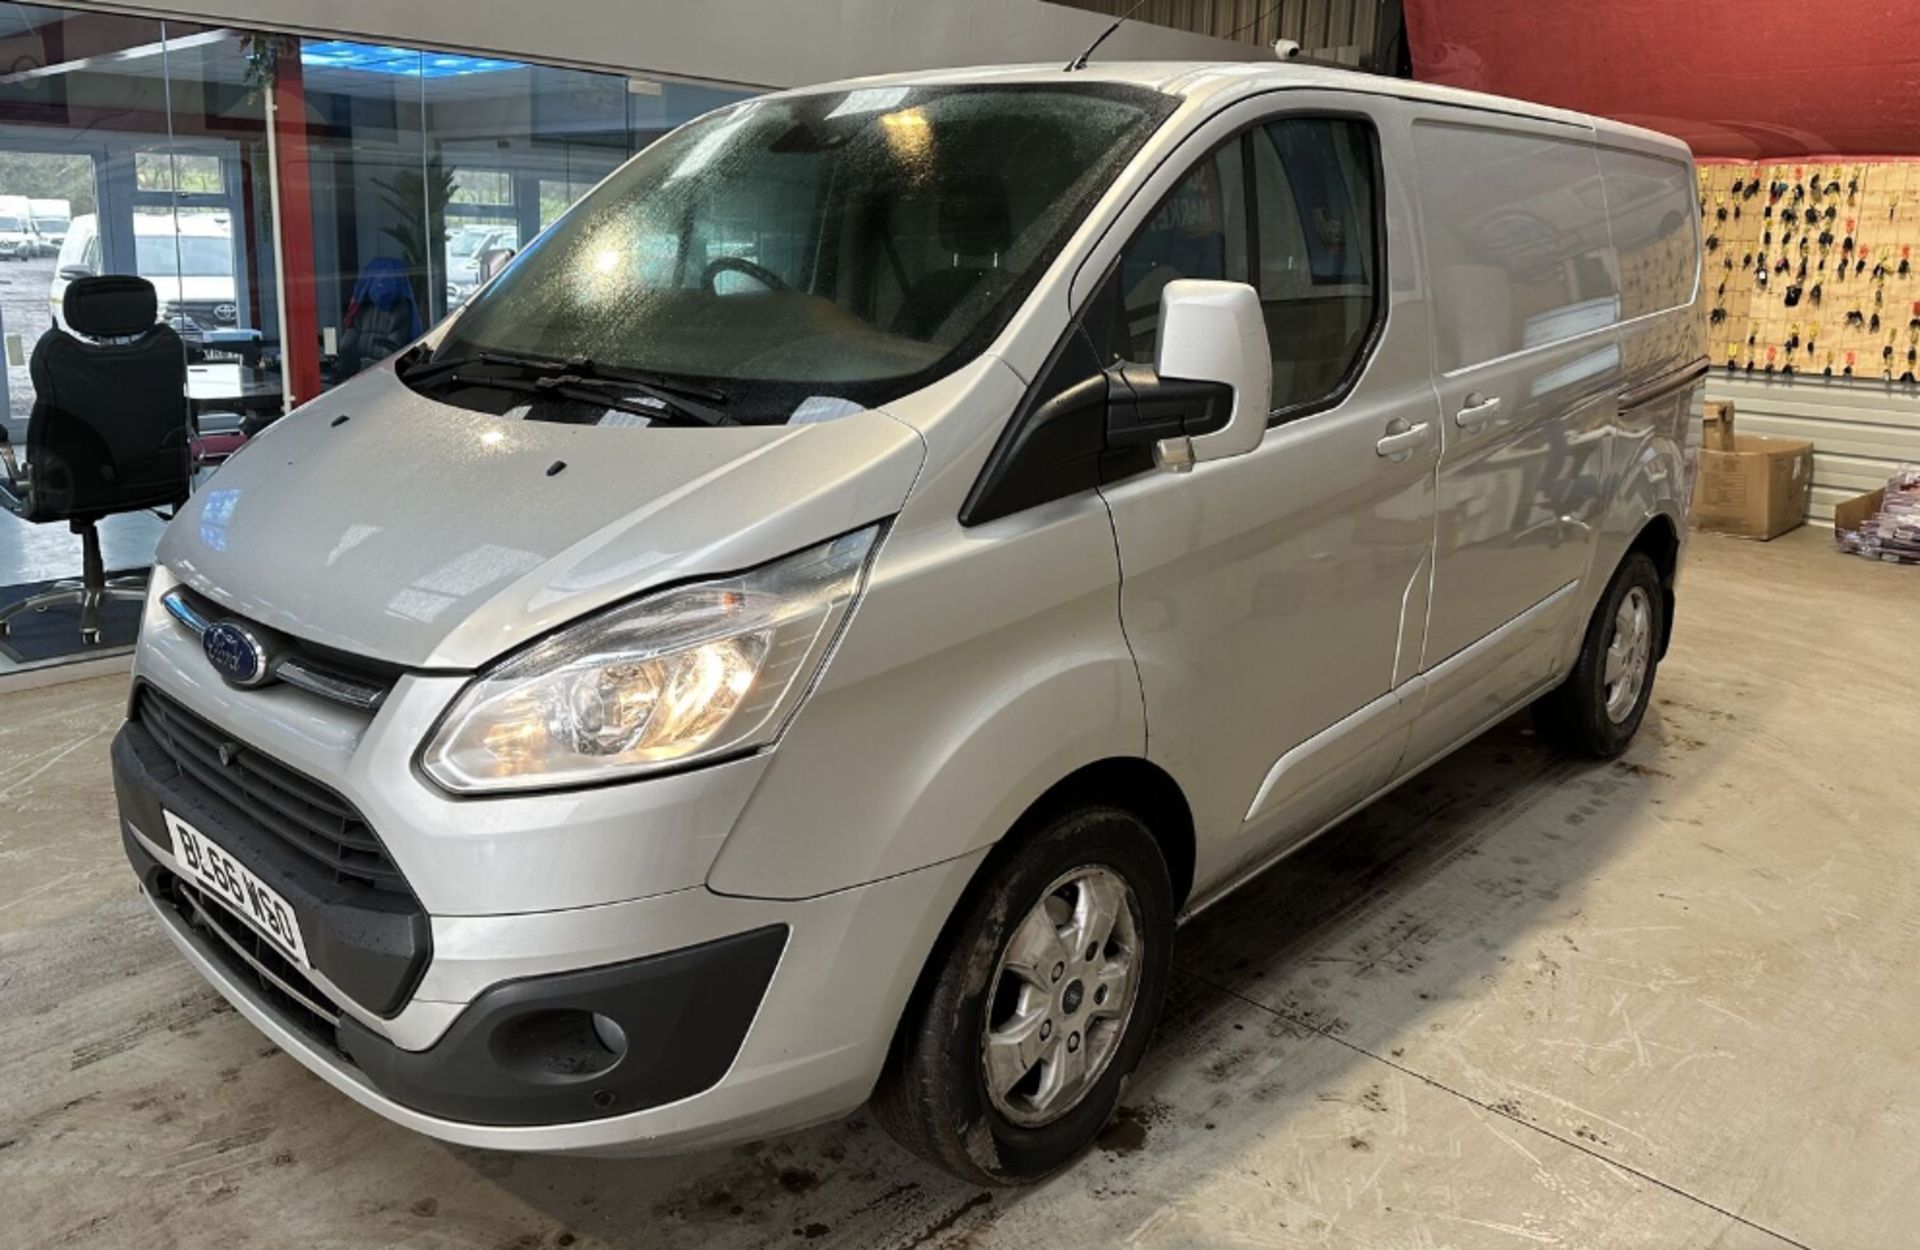 SILVER STUNNER: 2016 TRANSIT CUSTOM 2.0 TDCI 130PS, LIMITED EDITION - Image 3 of 12